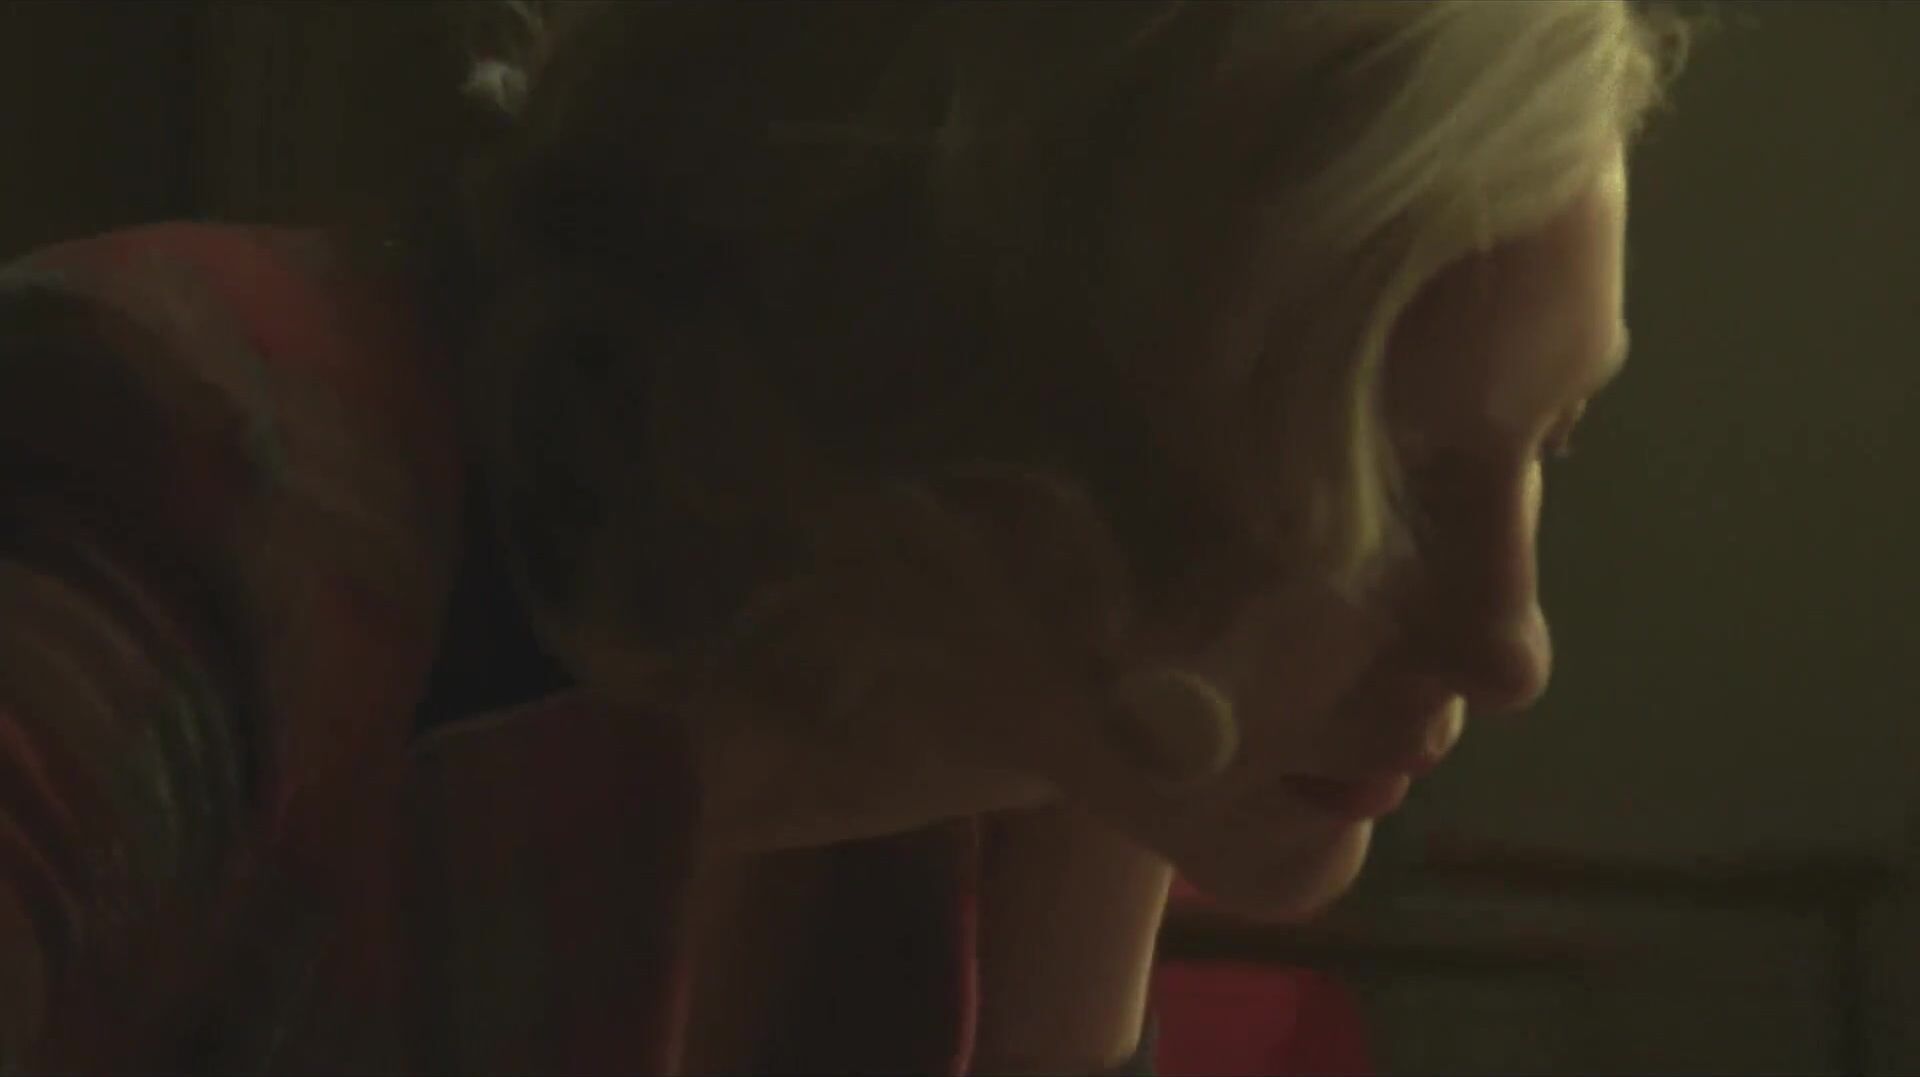 Curious Erotic lesbian women from movie industry bang each other in drama film Carol (2014) 18 Year Old - 1